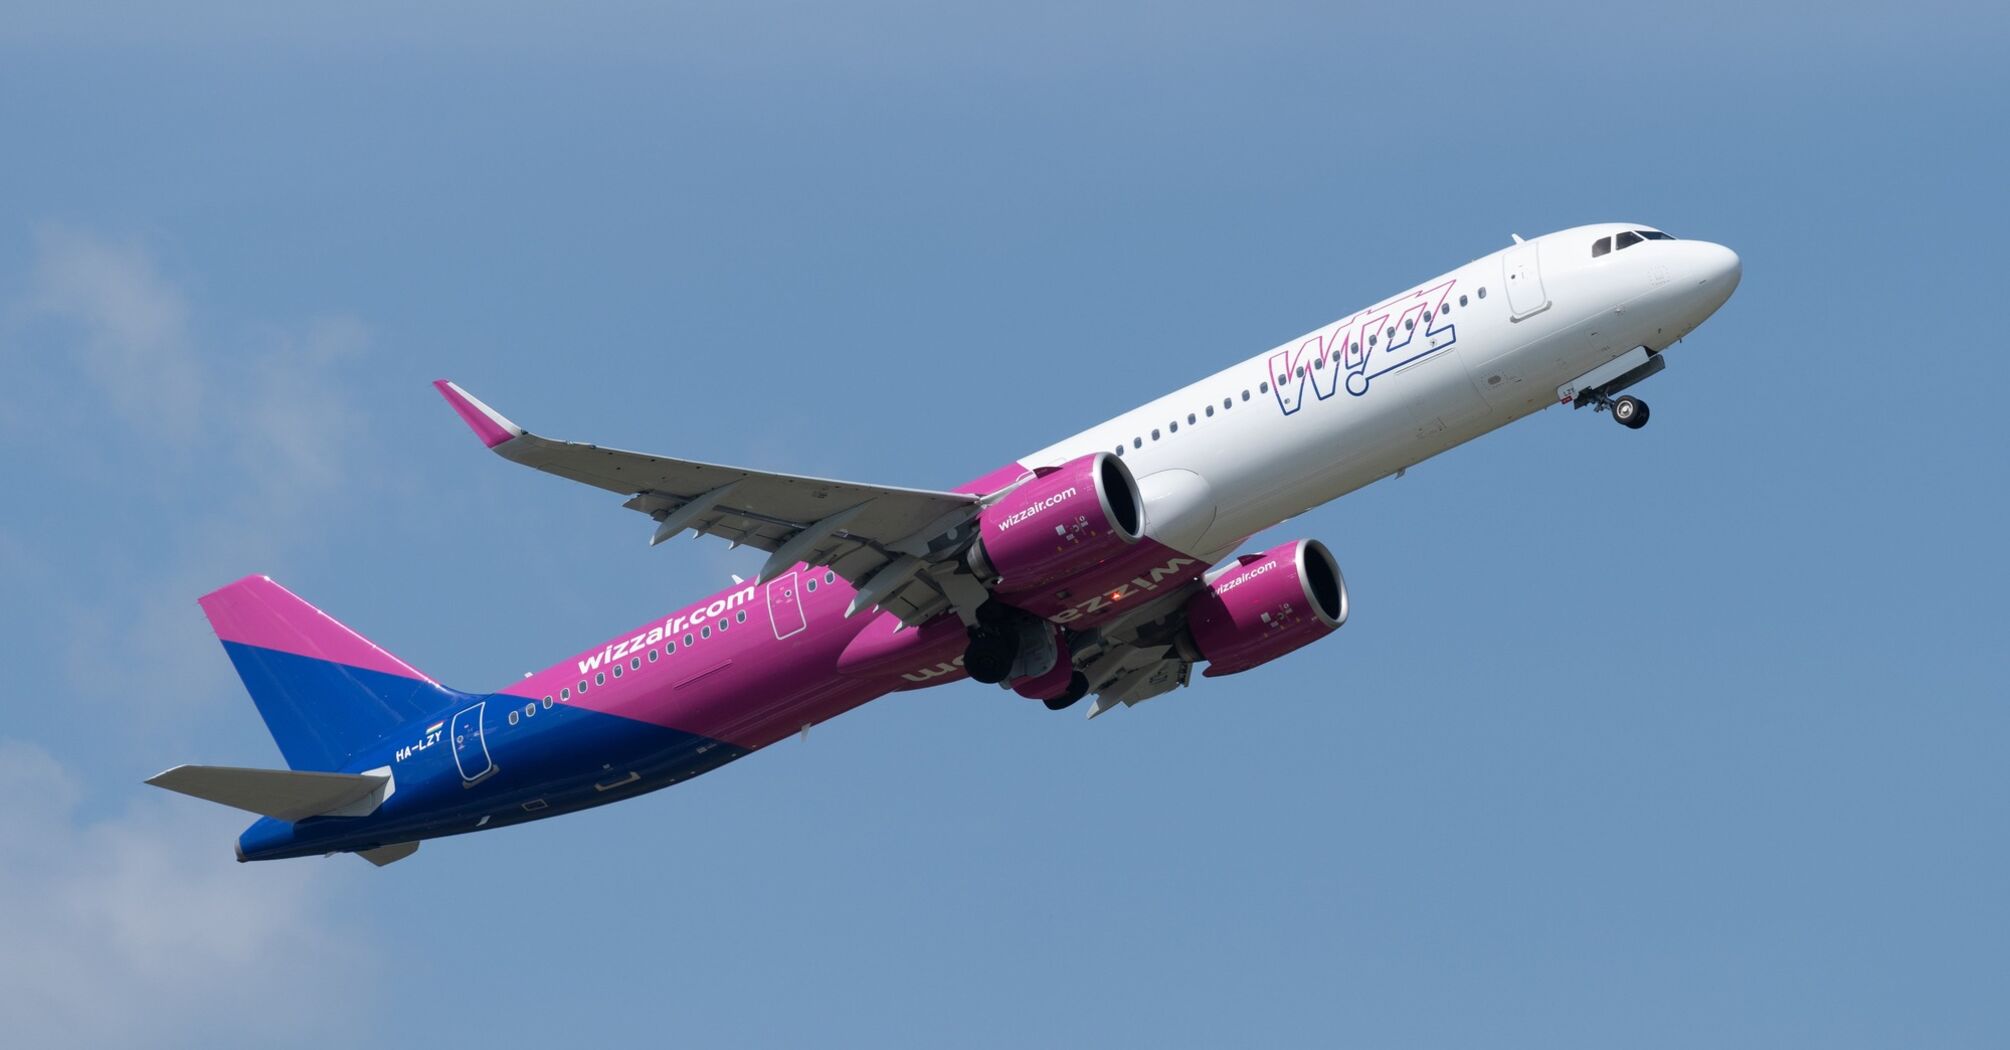 Wizz Air transported almost 5 million passengers in December